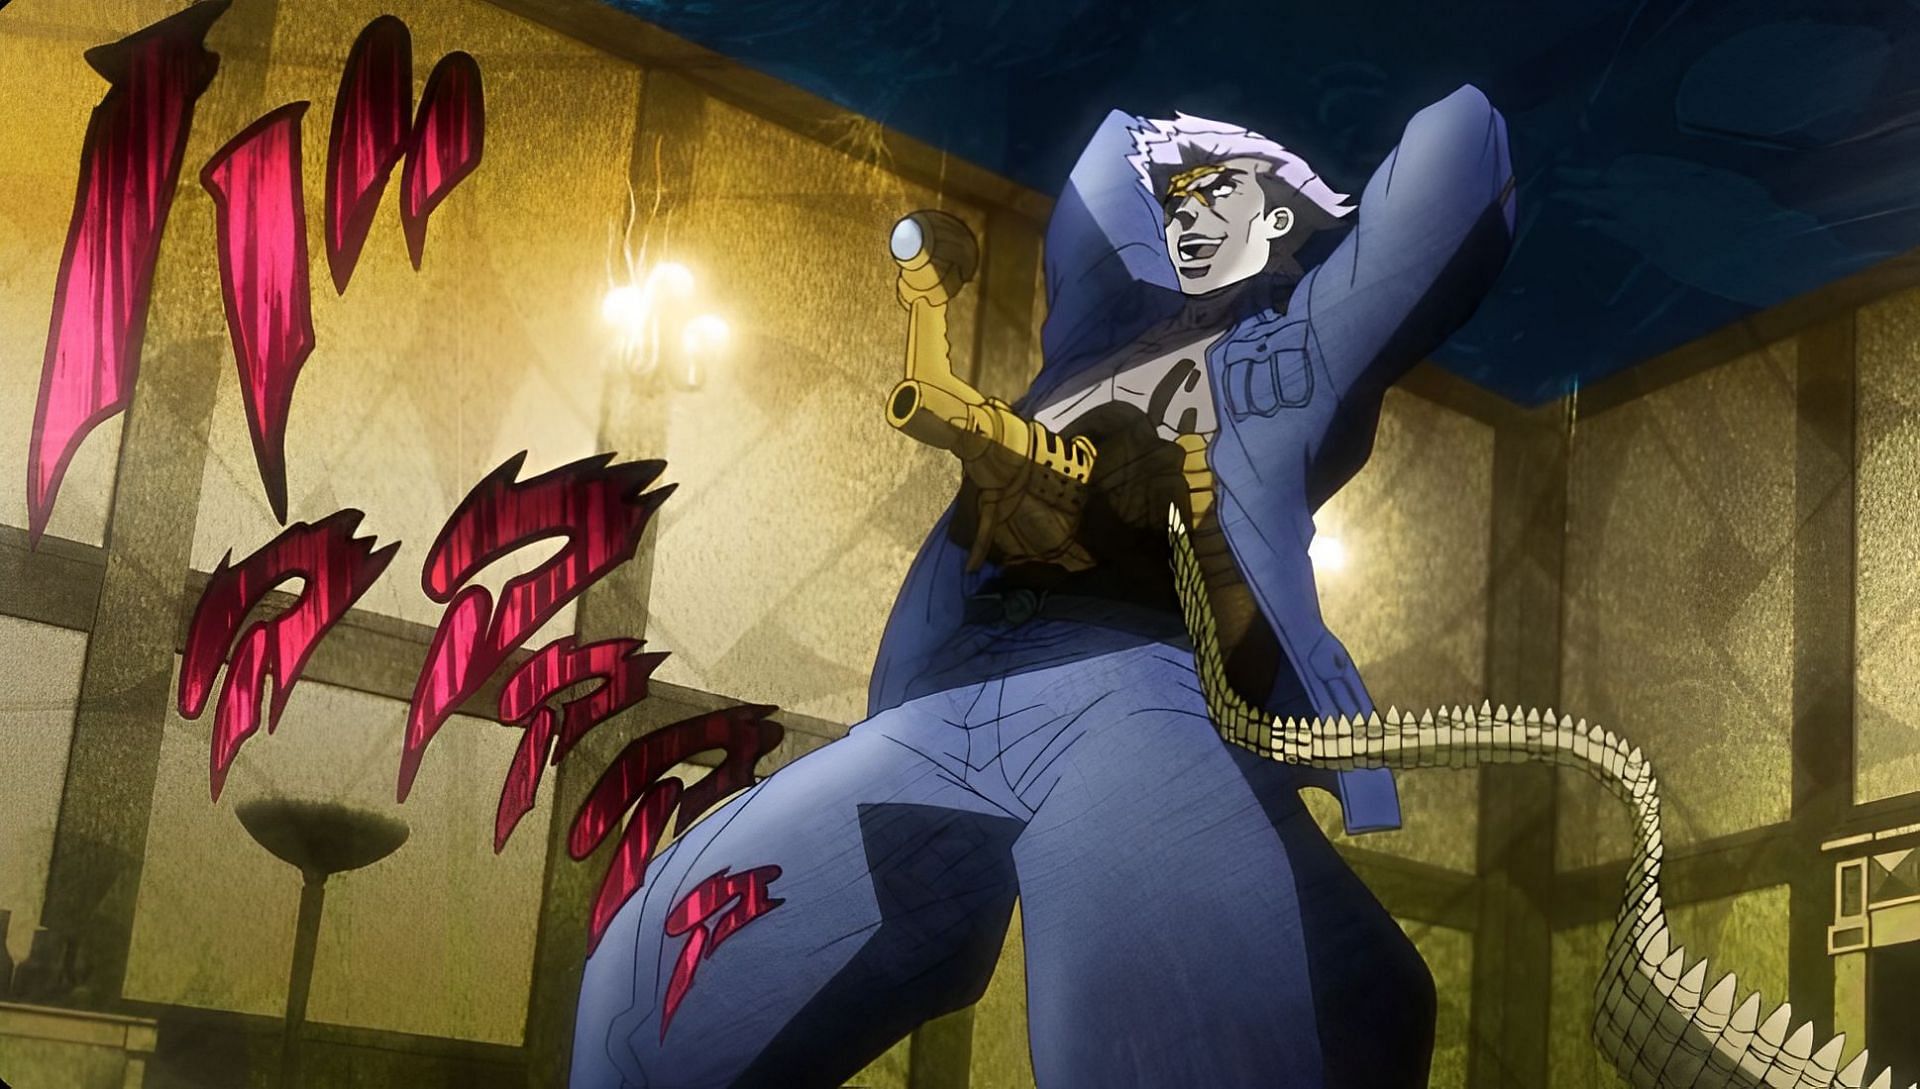 The Strictly Series on X: Best JoJo Poses: Giorno's Gang-Star